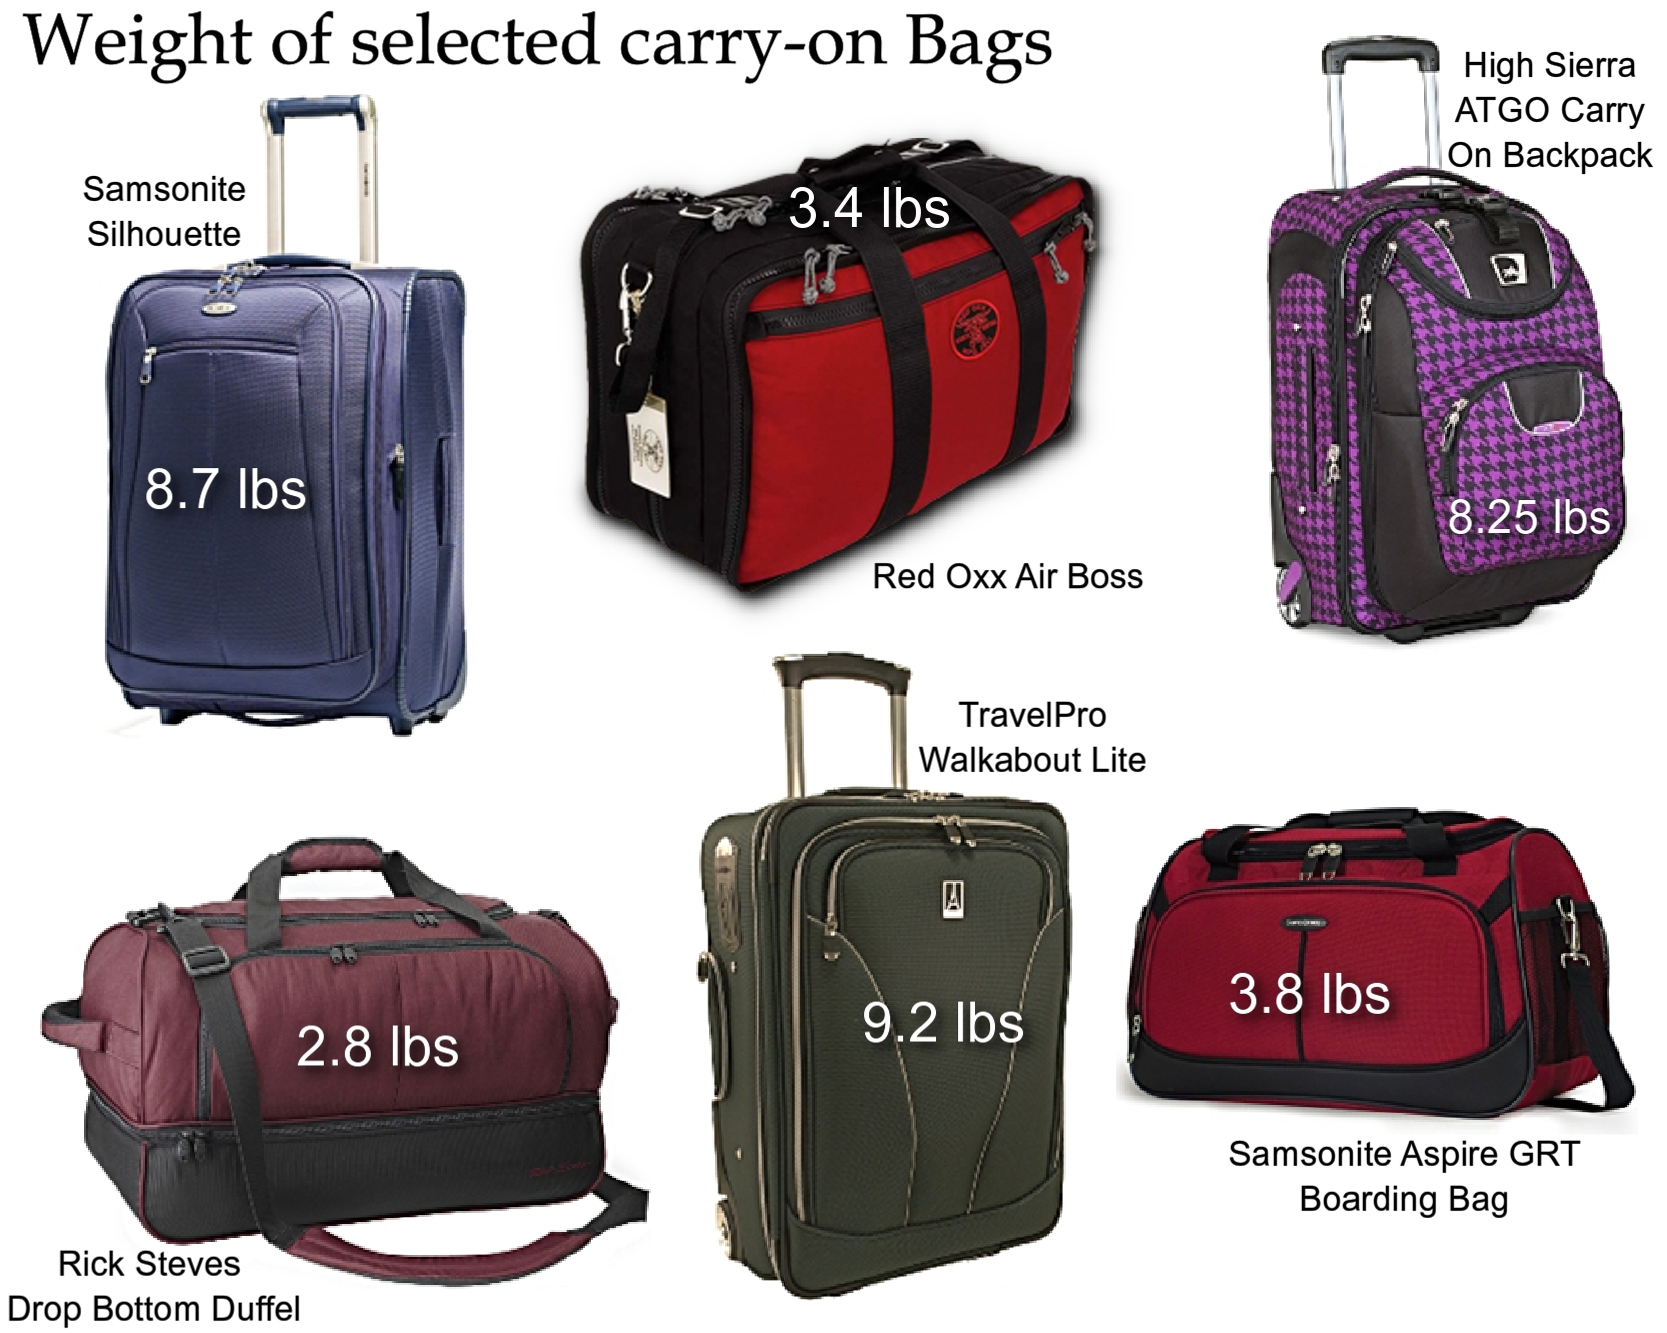 Share 145+ types of carry on bags latest - xkldase.edu.vn